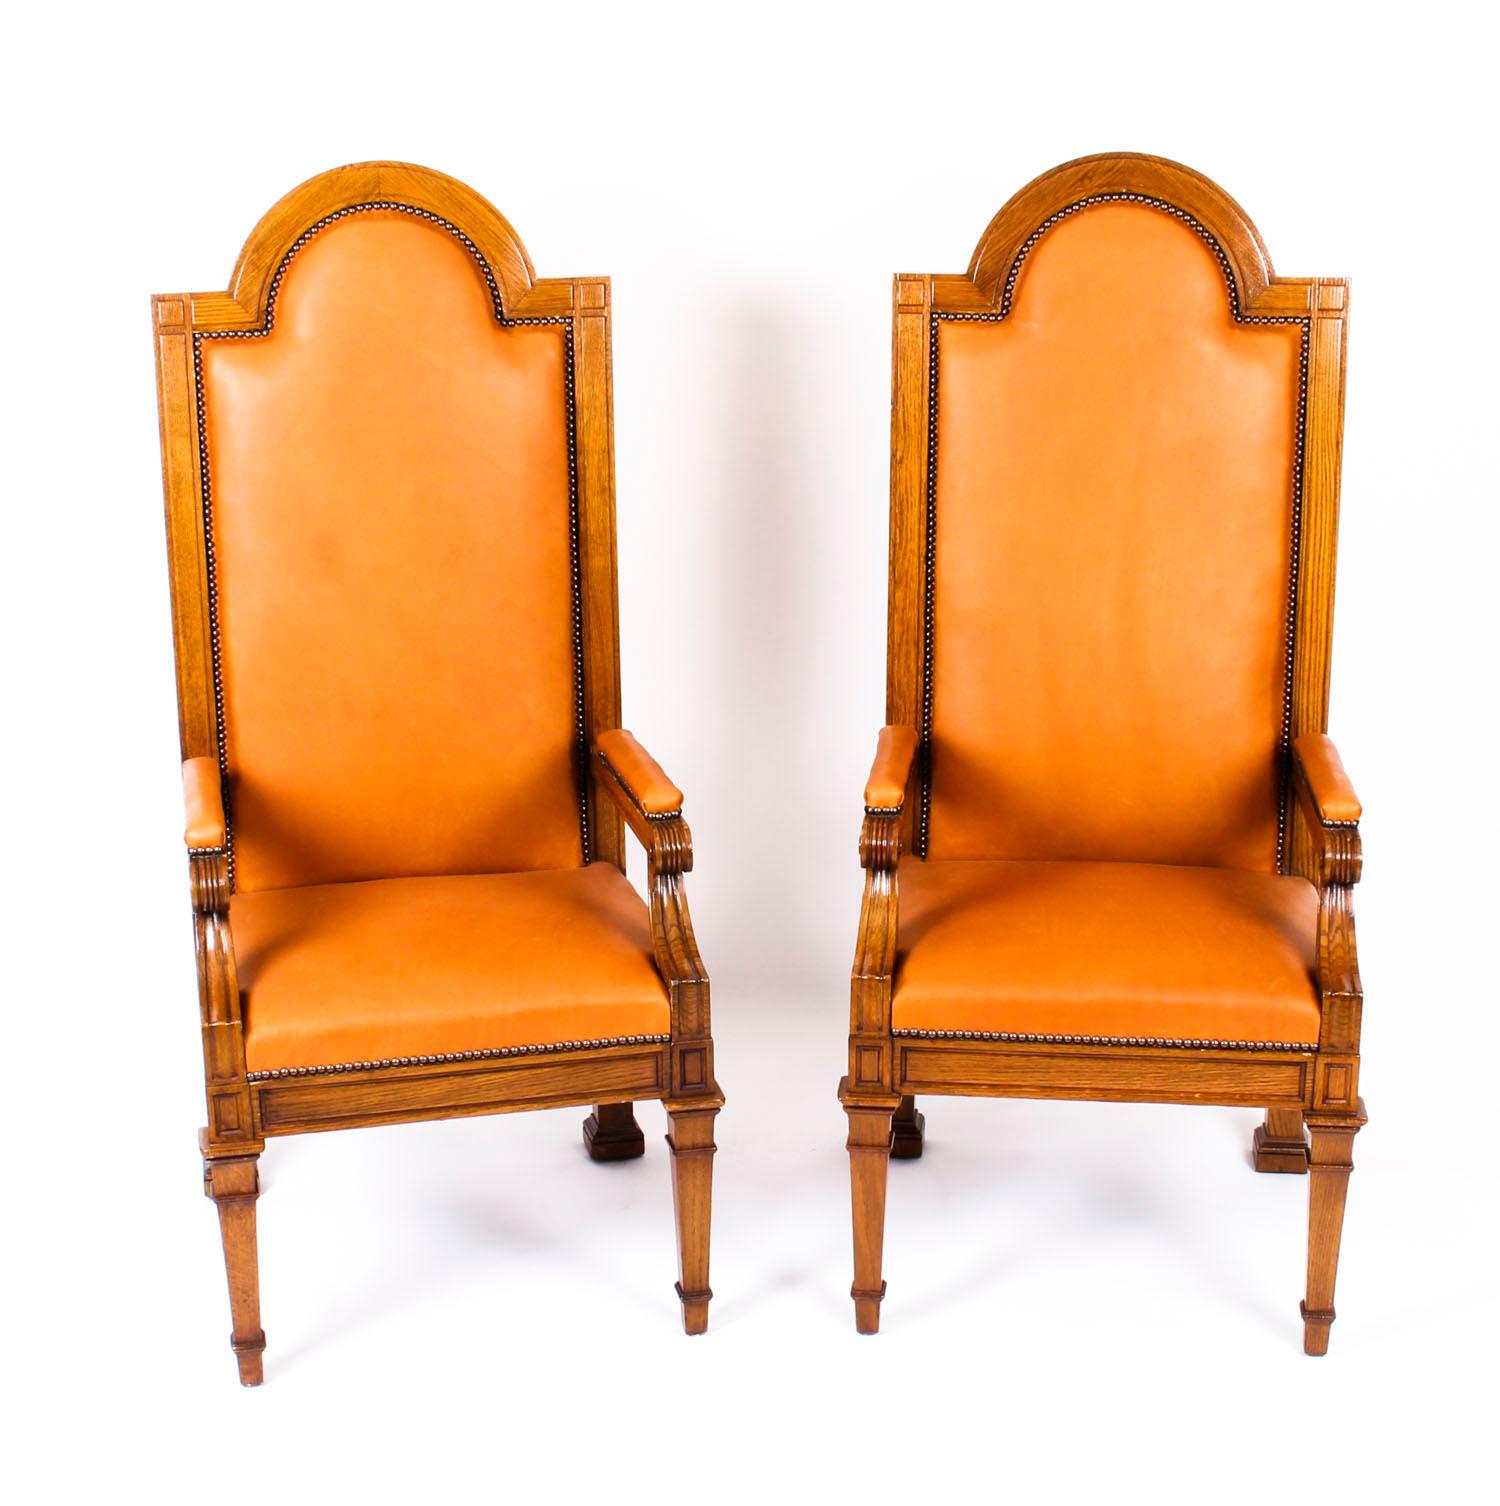 This is a truly impressive antique pair of Victorian solid oak high backed Judges Throne chairs, circa 1870 in date.

The solid oak frames have been skillfully carved in the medieval Gothic influence in the form of thrones with distinctive high